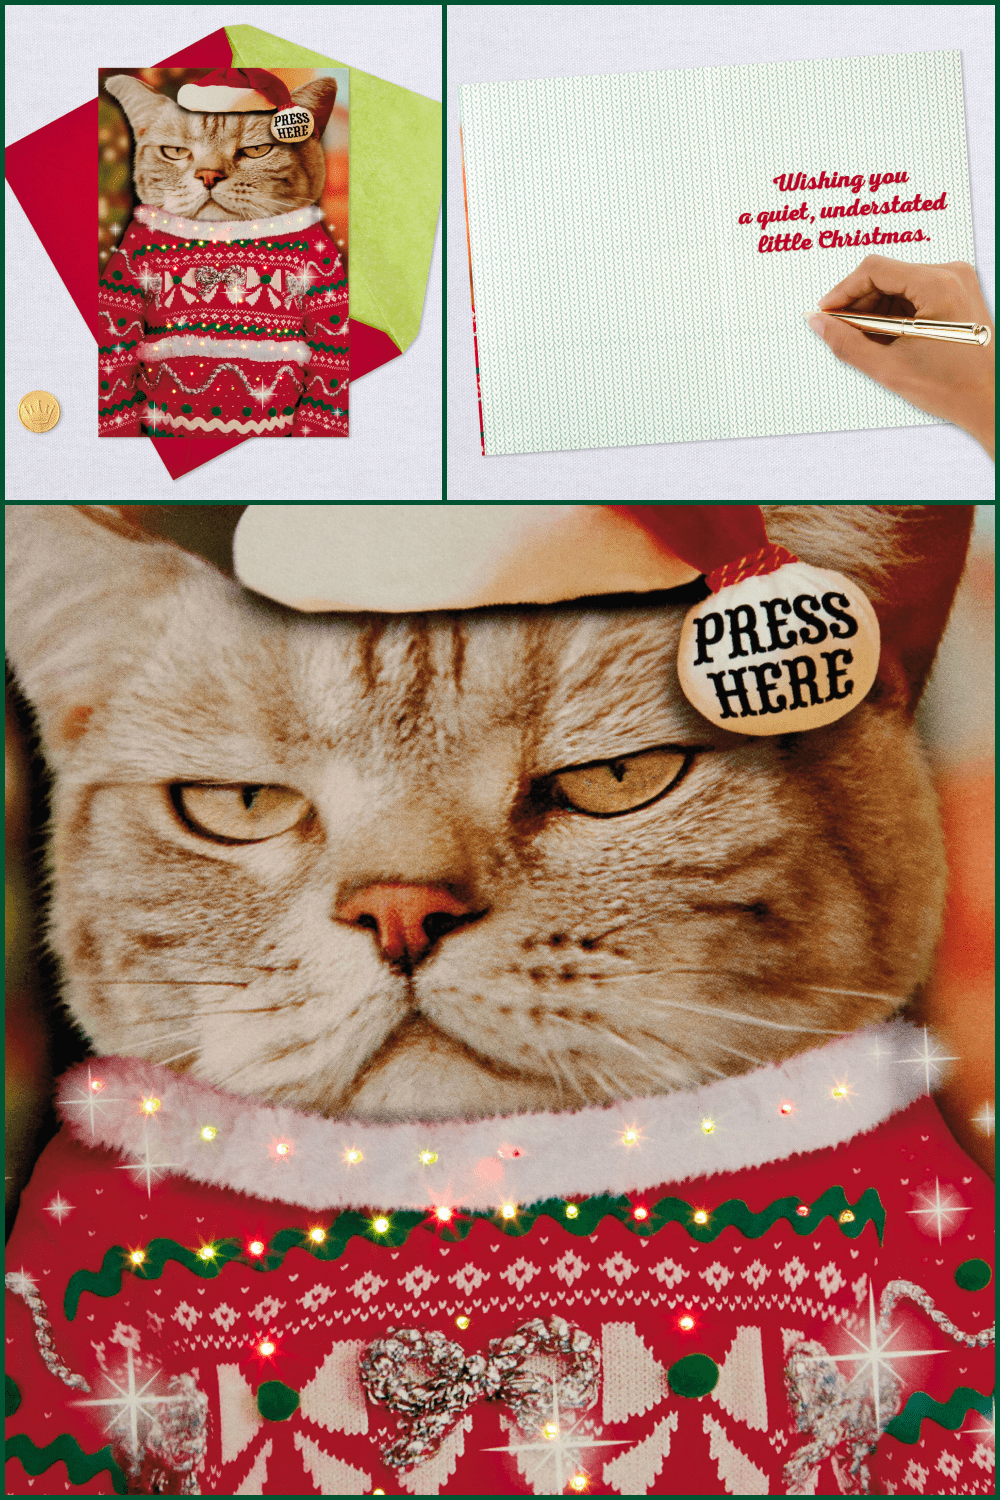 Card with a grumpy cat in a funny Christmas sweater.